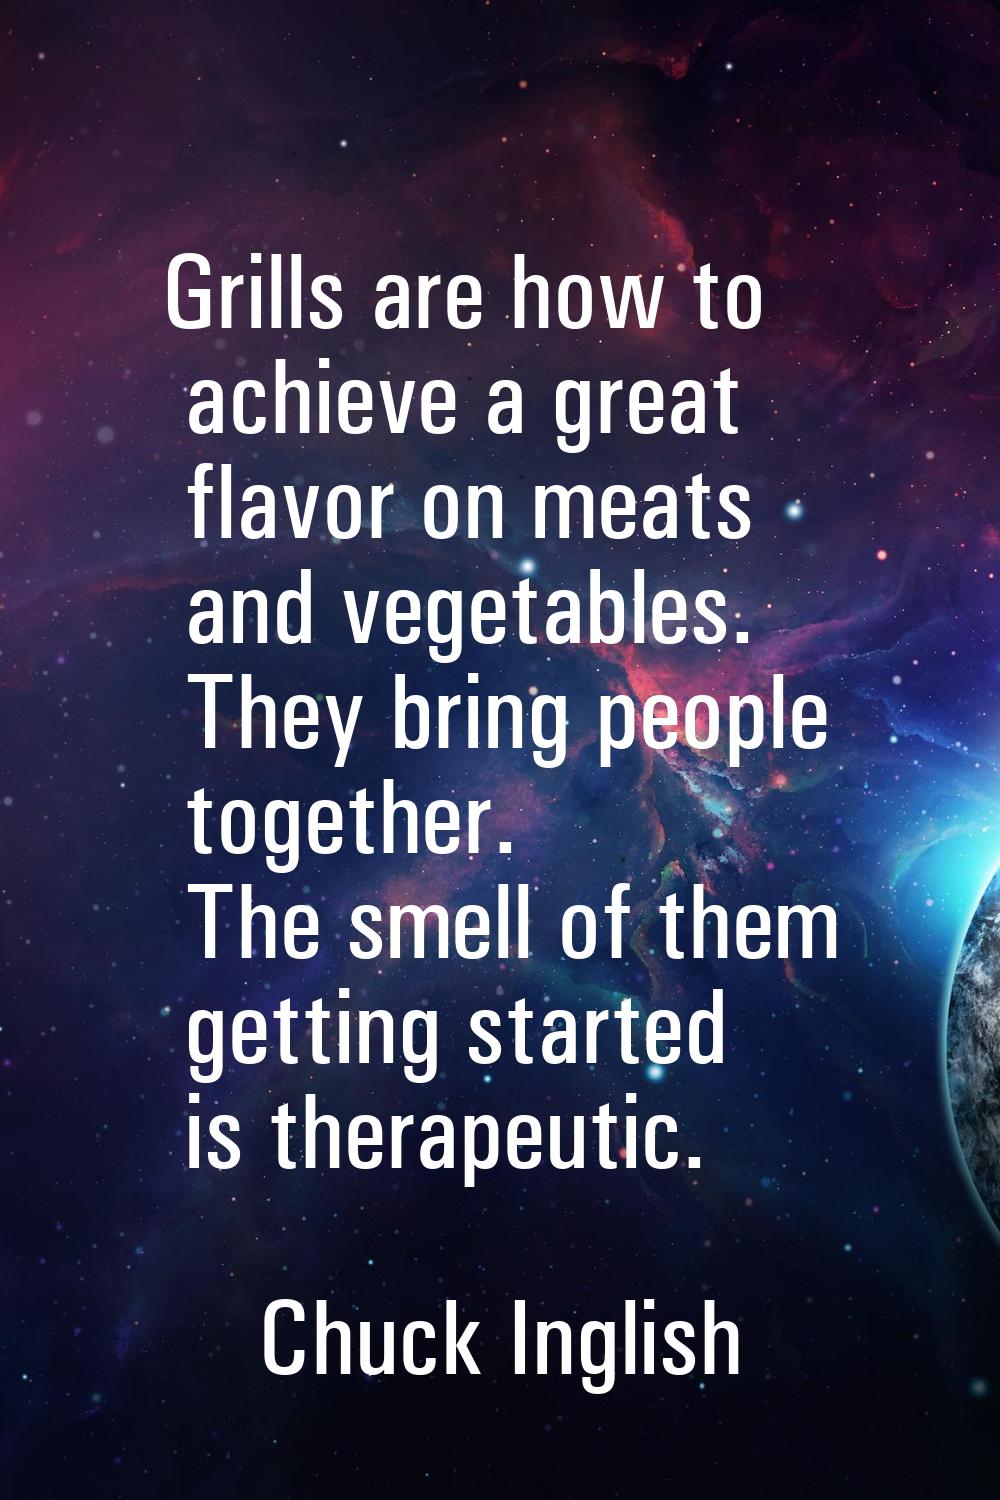 Grills are how to achieve a great flavor on meats and vegetables. They bring people together. The s